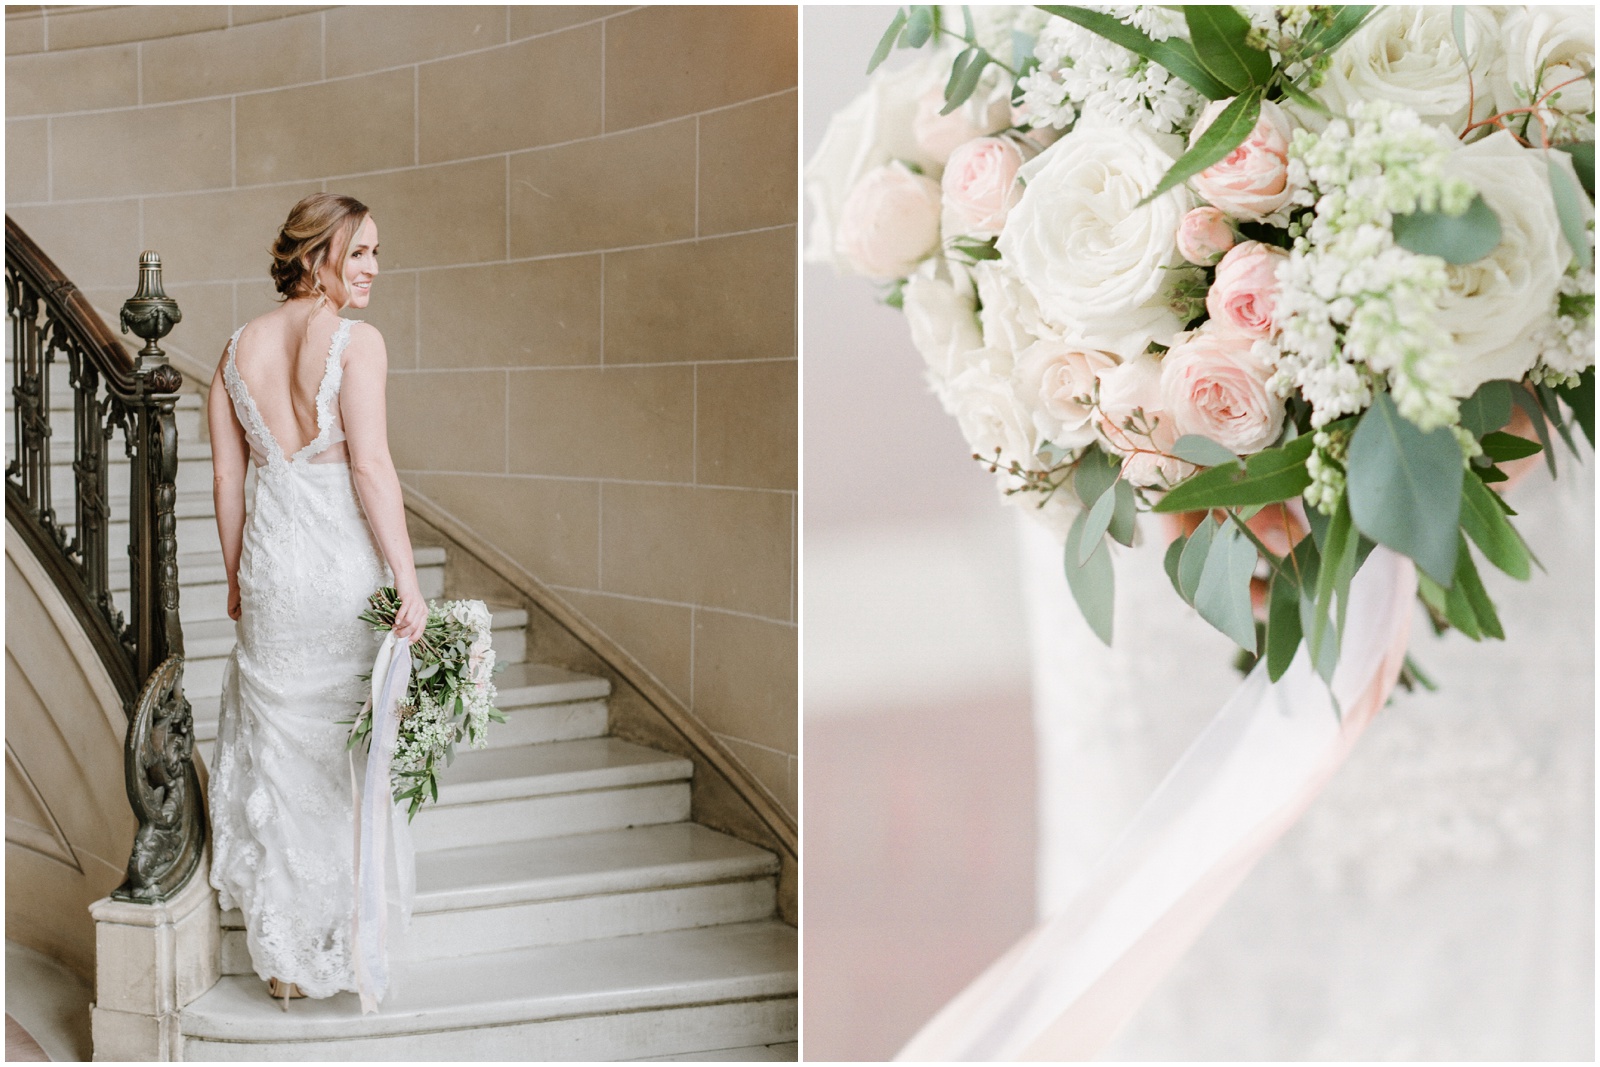 Bride walking up staircase with bouquet